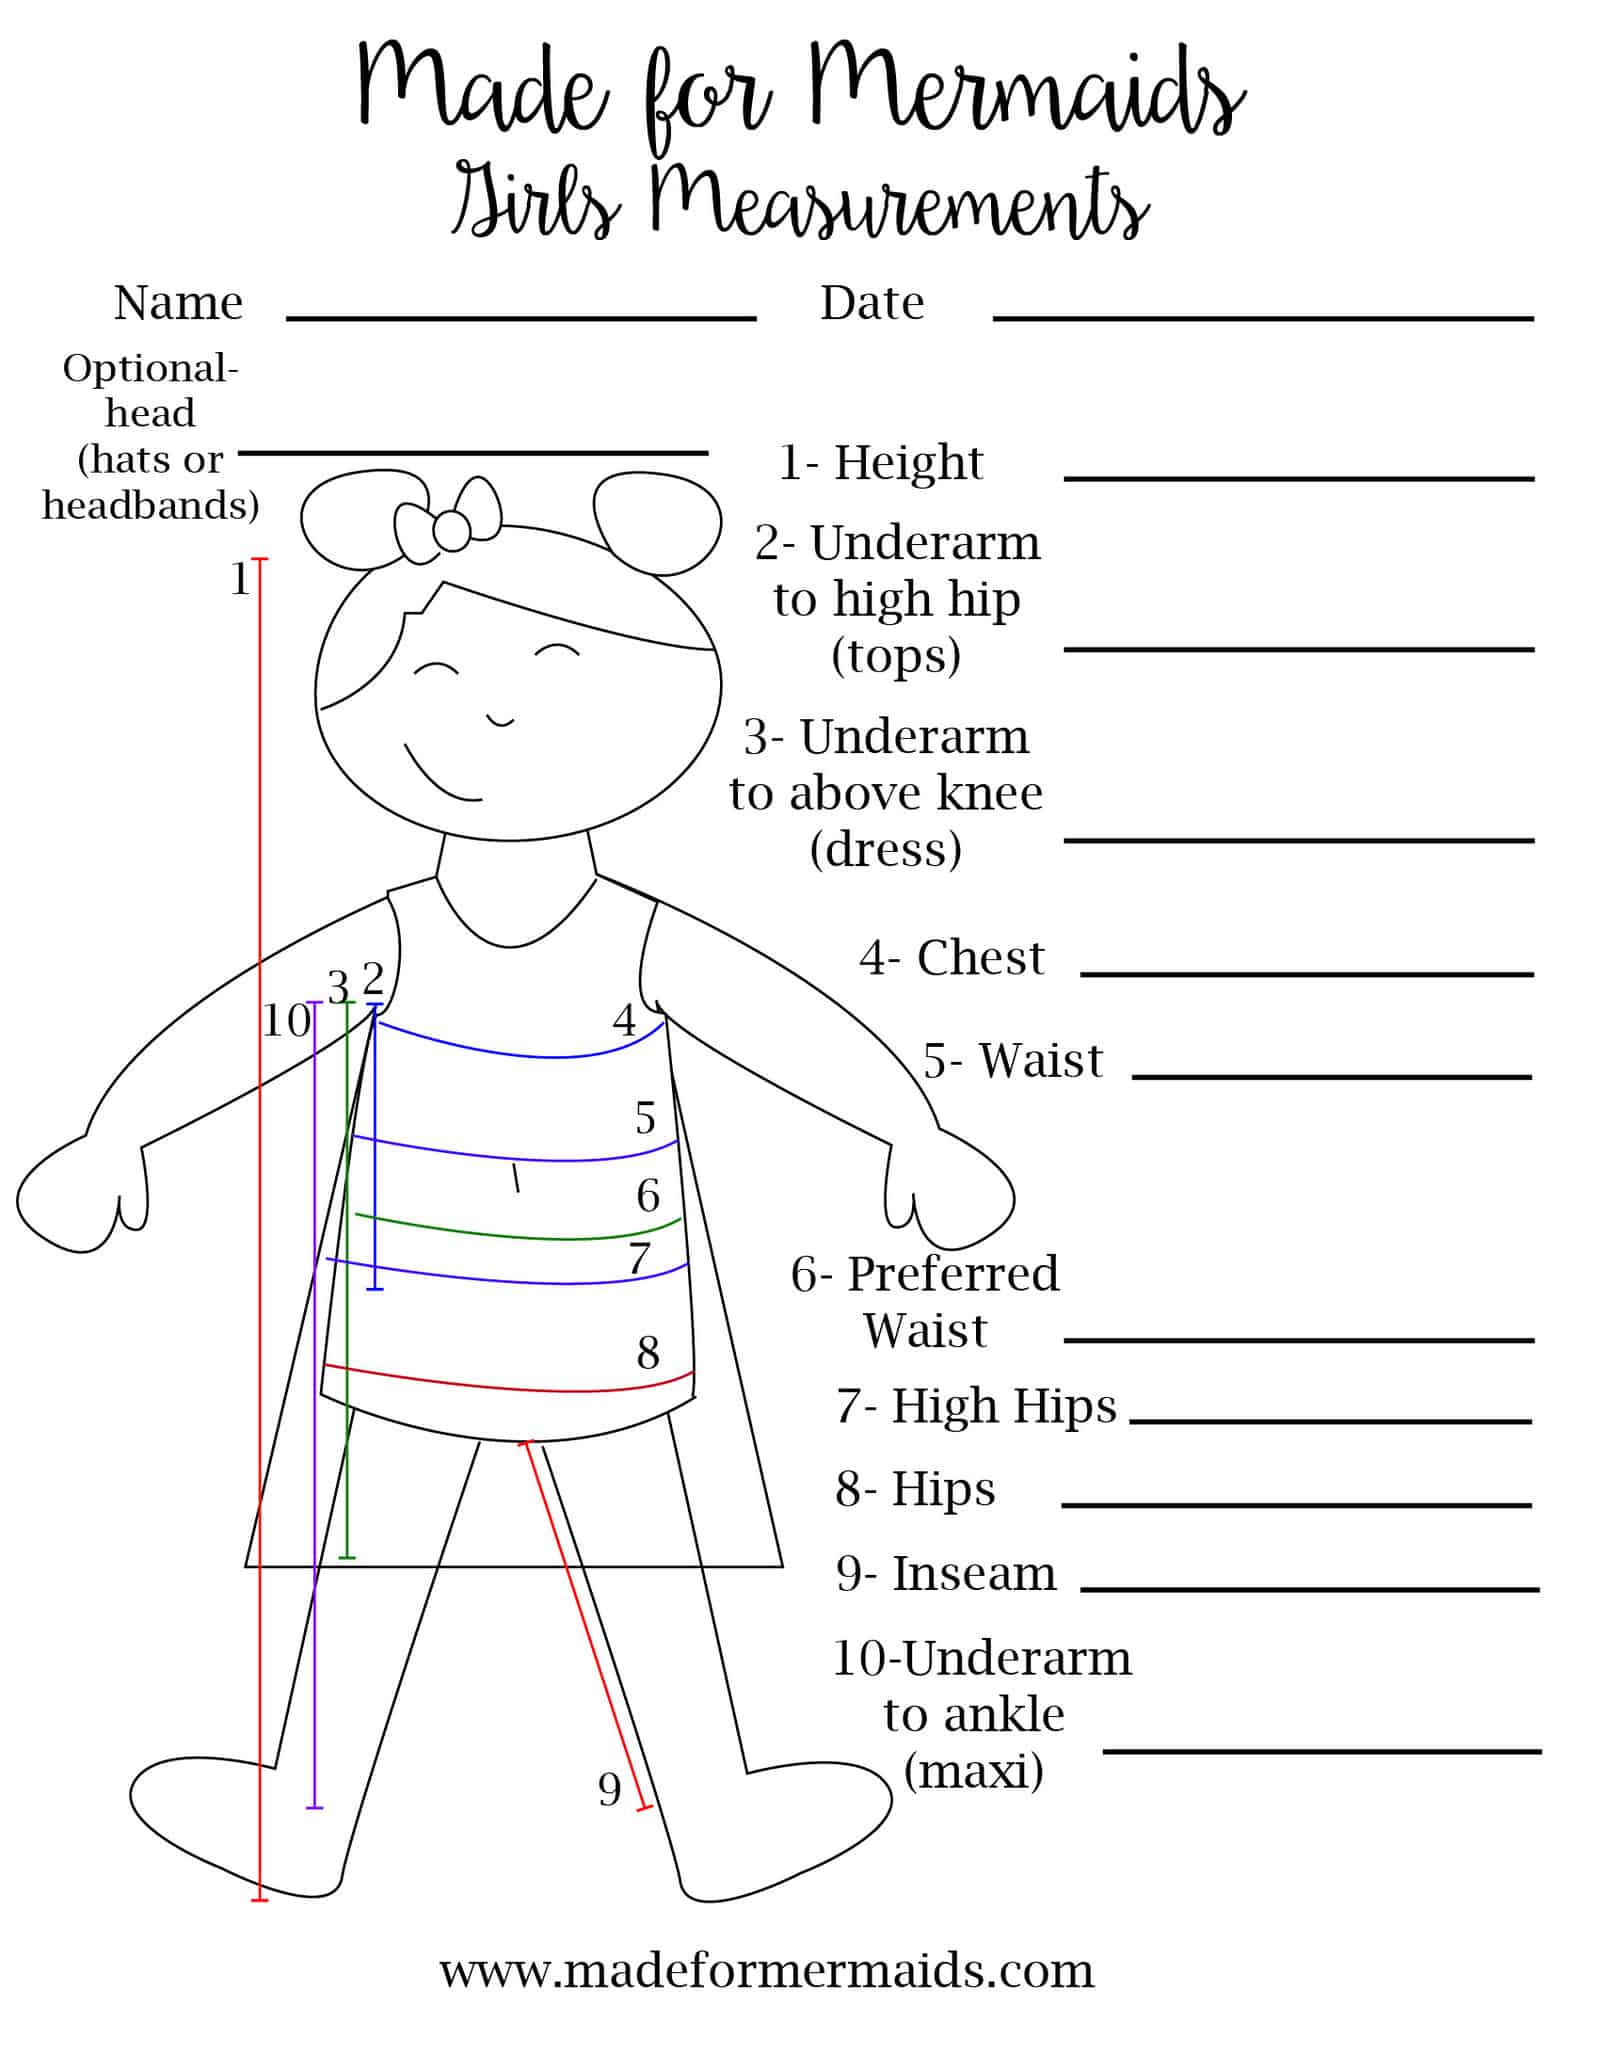 50-free-printable-body-measurement-chart-for-sewing-rmahthorin